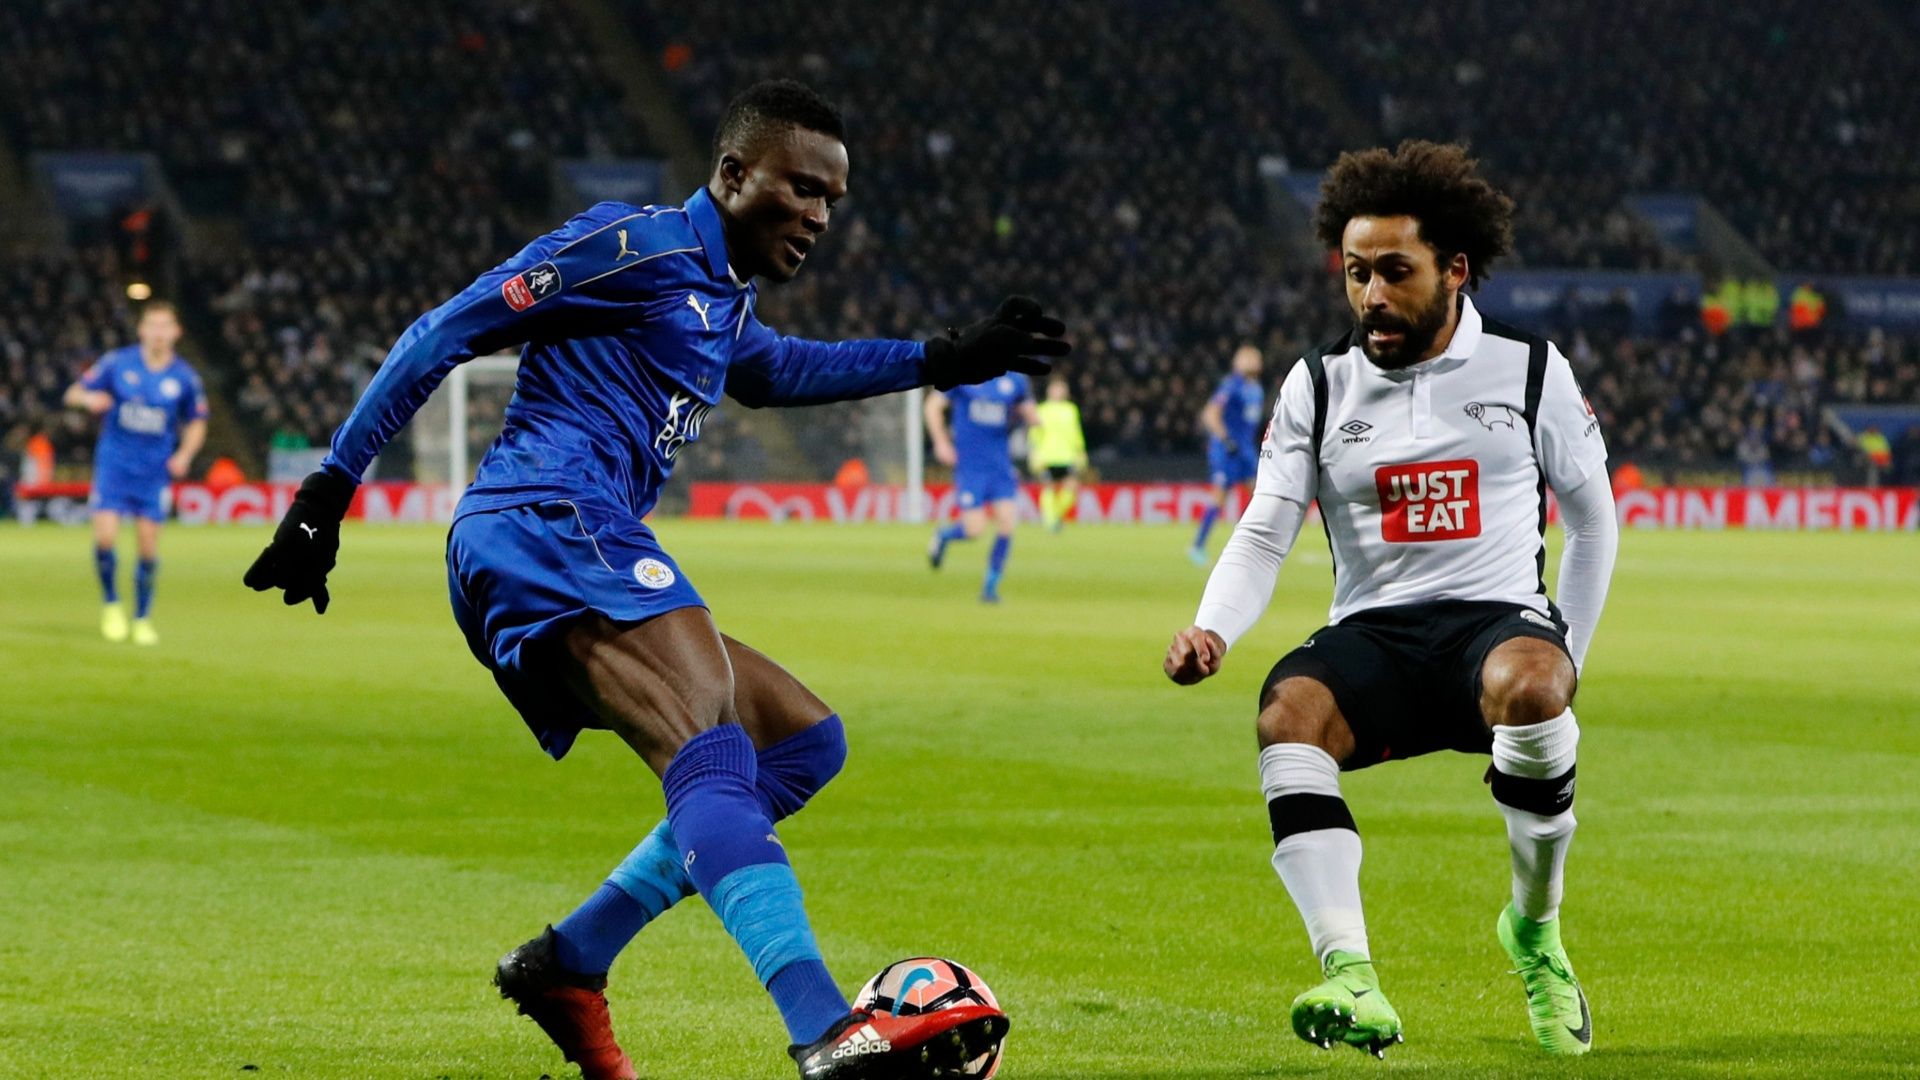 Leicester City's Daniel Amartey in action with Derby's Ikechi Anya